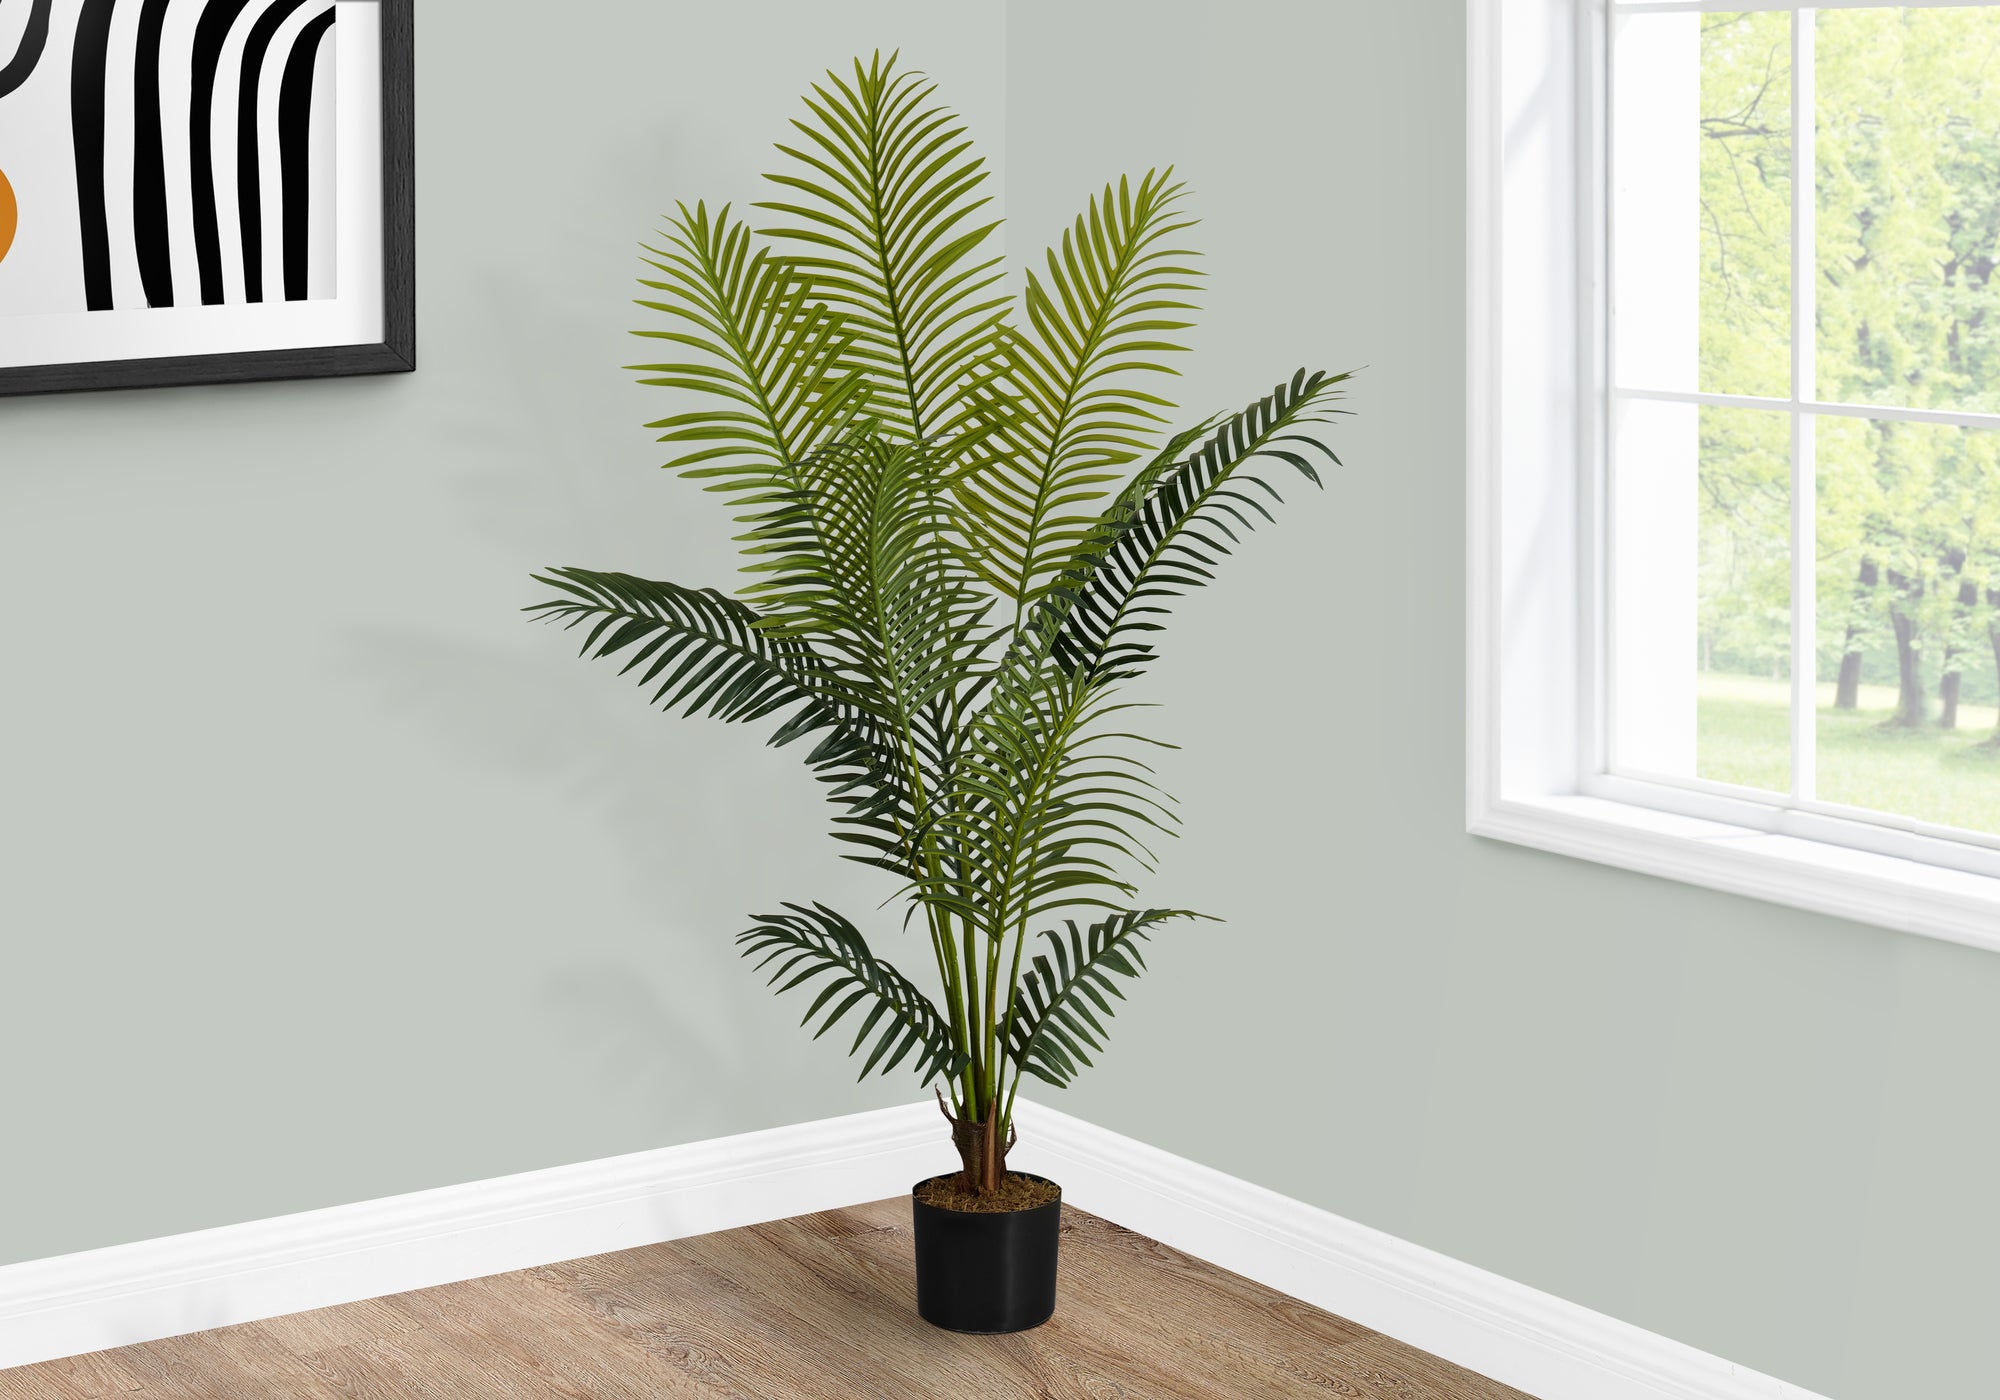 MN-429536    Artificial Plant, 57" Tall, Palm Tree, Indoor, Faux, Fake, Floor, Greenery, Potted, Real Touch, Decorative, Green Leaves, Black Pot